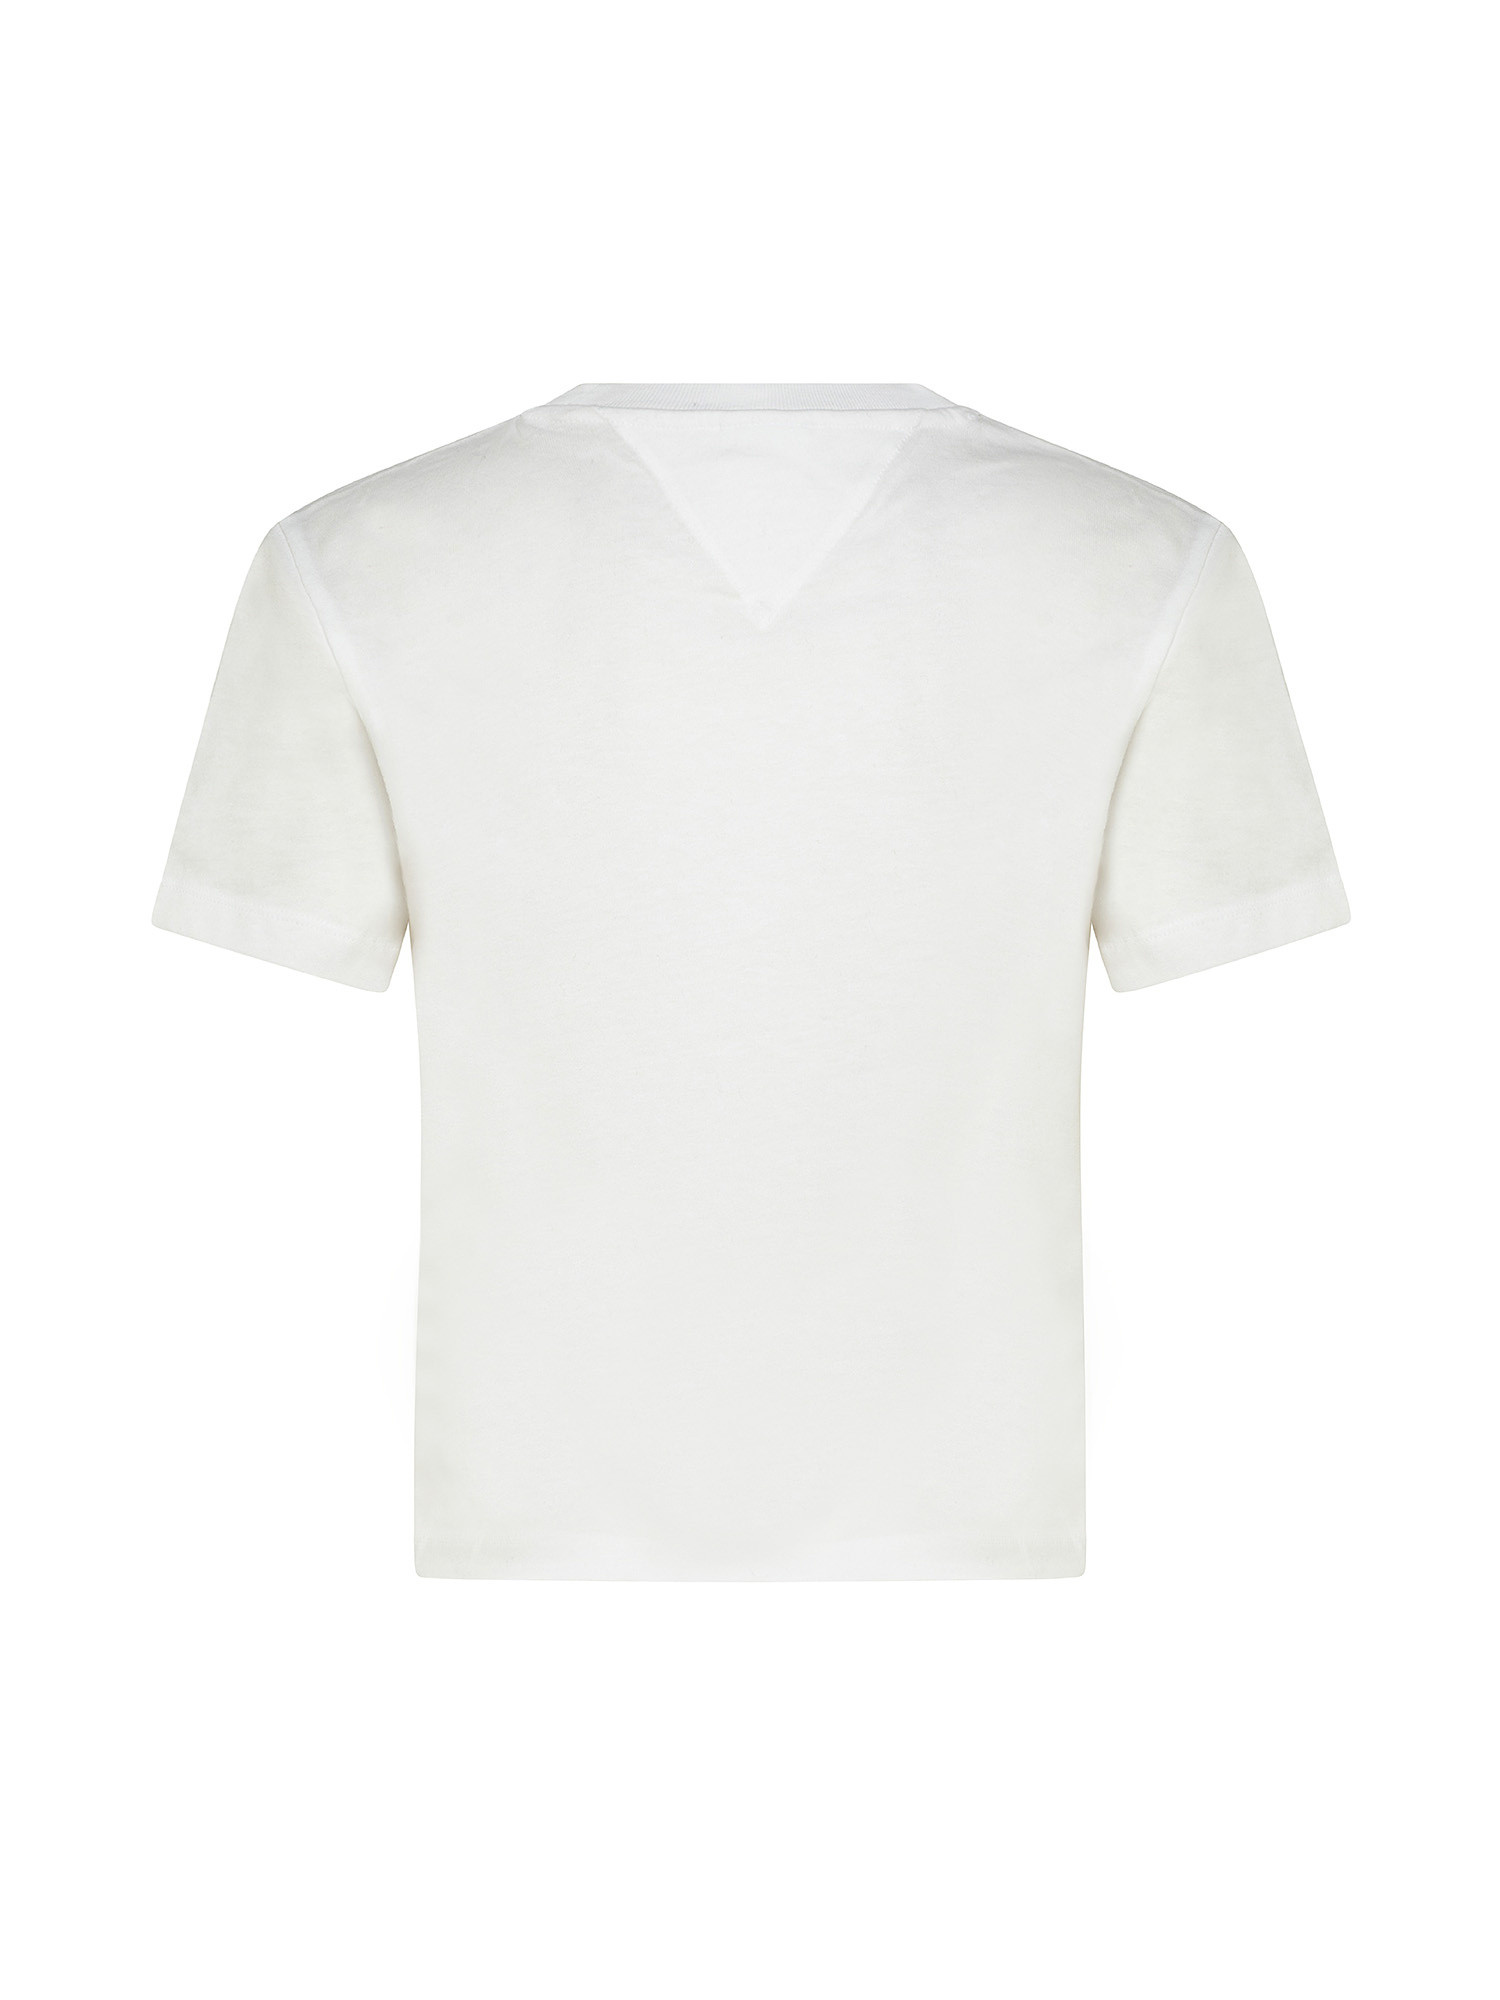 T-shirt with embroidered logo, White, large image number 1